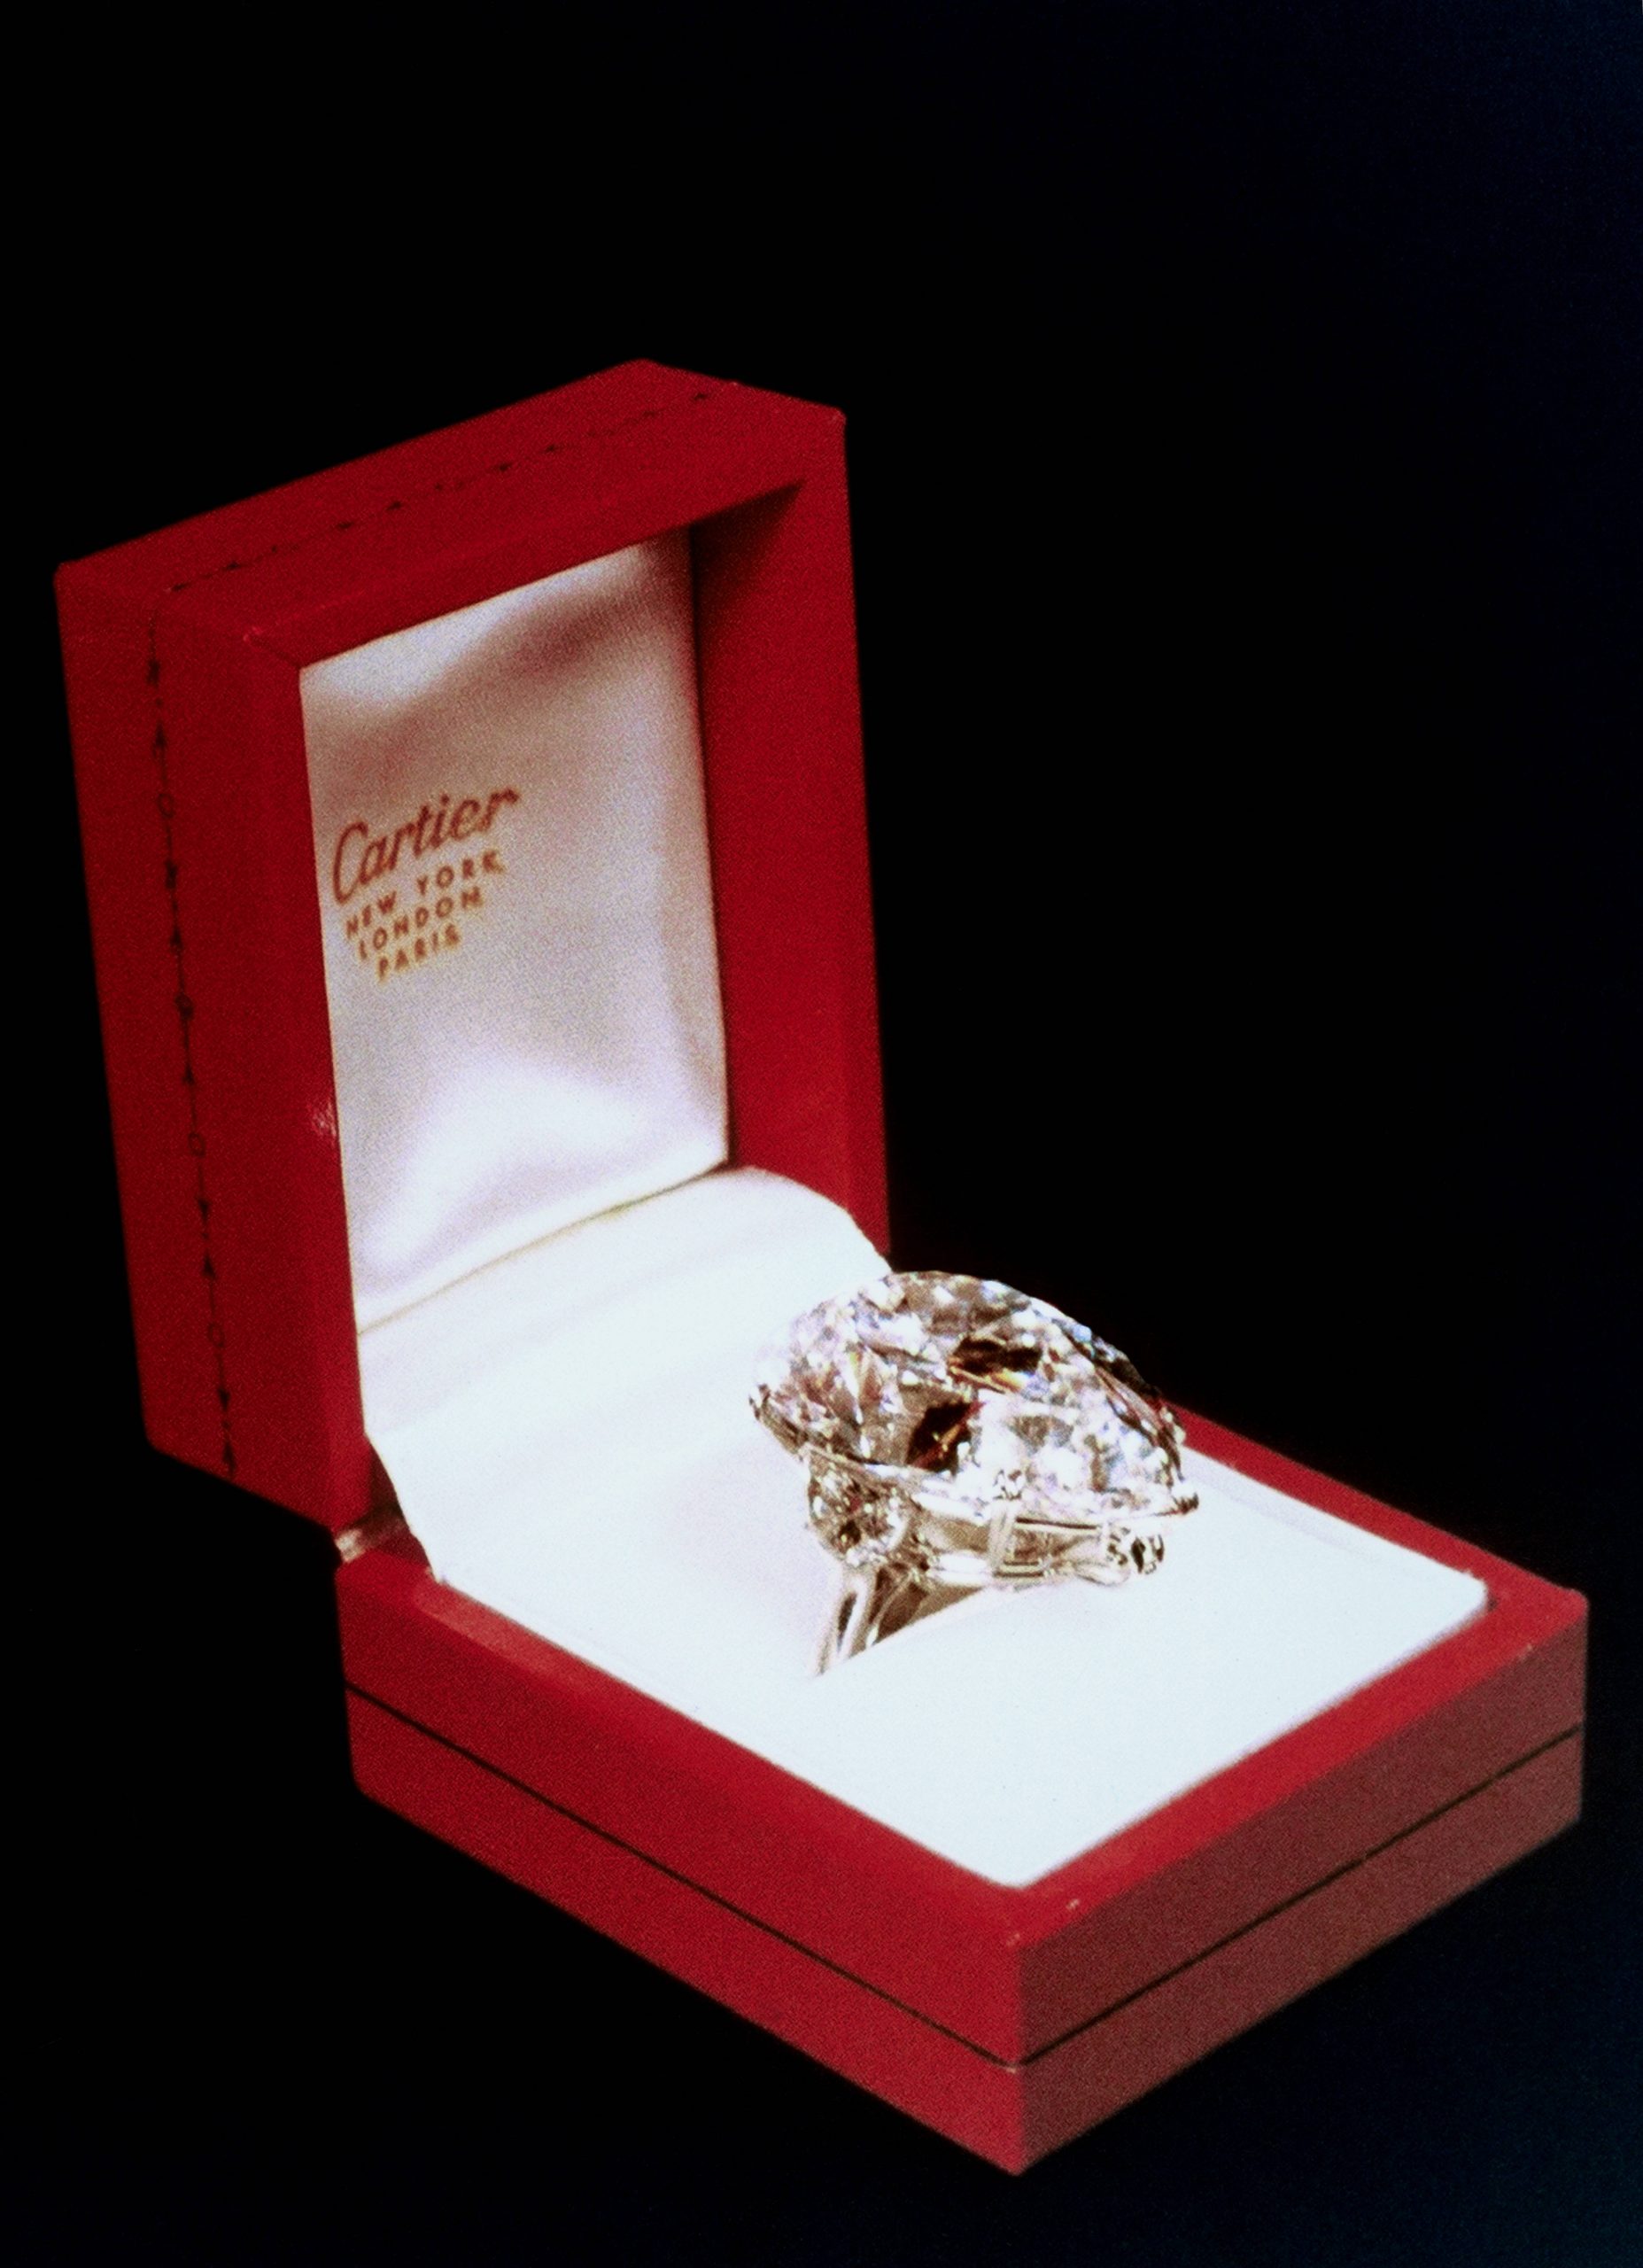 The Cartier Burton Taylor diamond was first mounted as a ring.